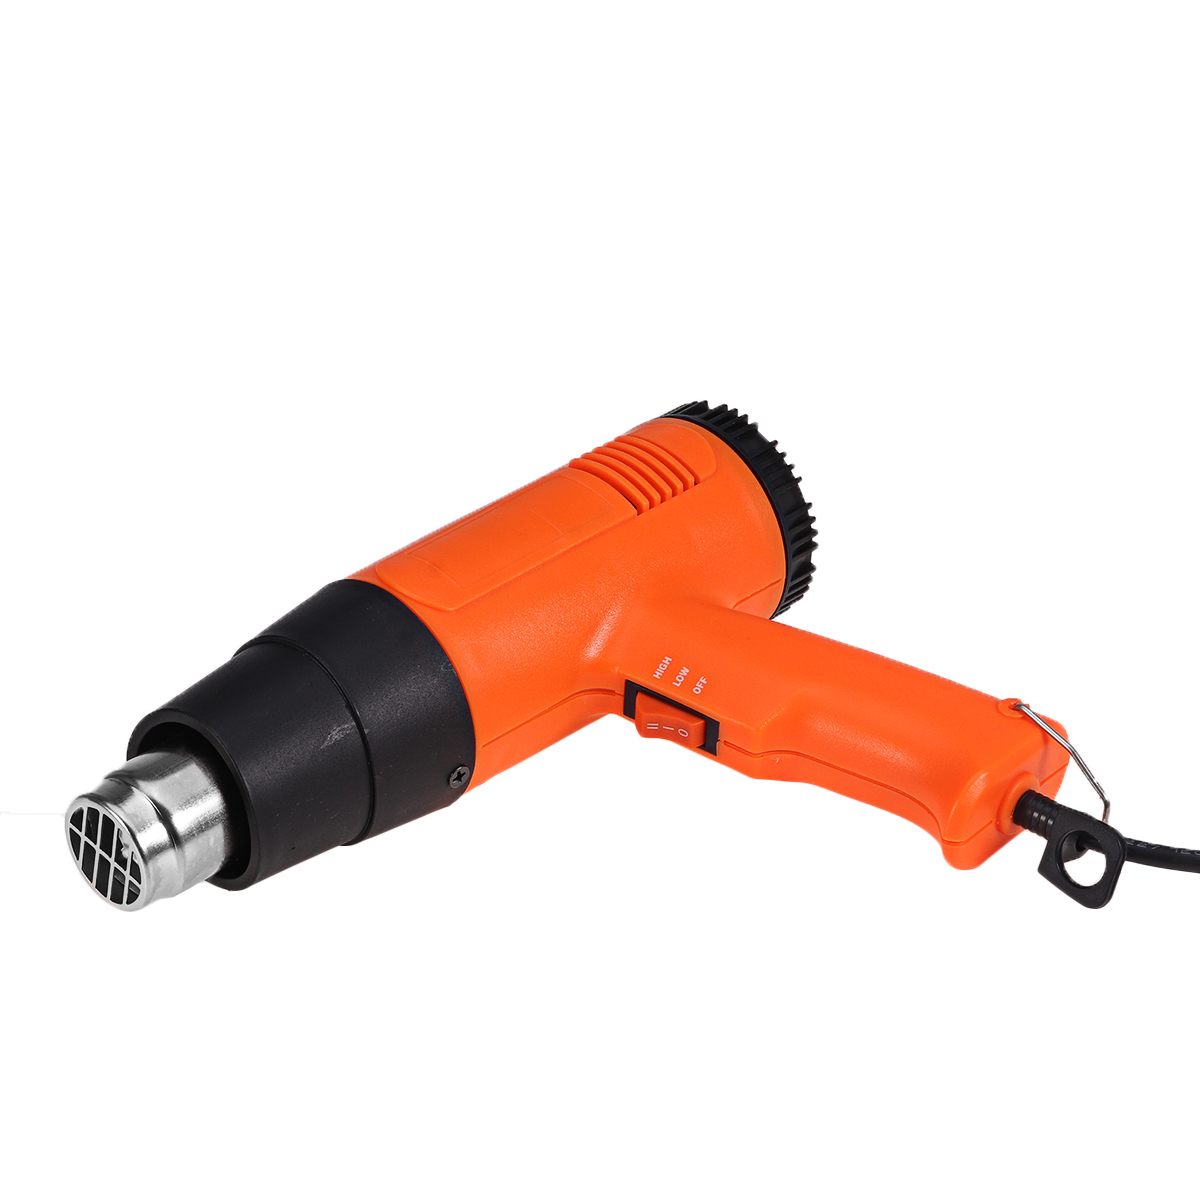 220V-2000W-Electric-Hot-Air-Heater-Heating-Tool-Shrink-Wrapping-Thermal-Power-Tool-1784452-7